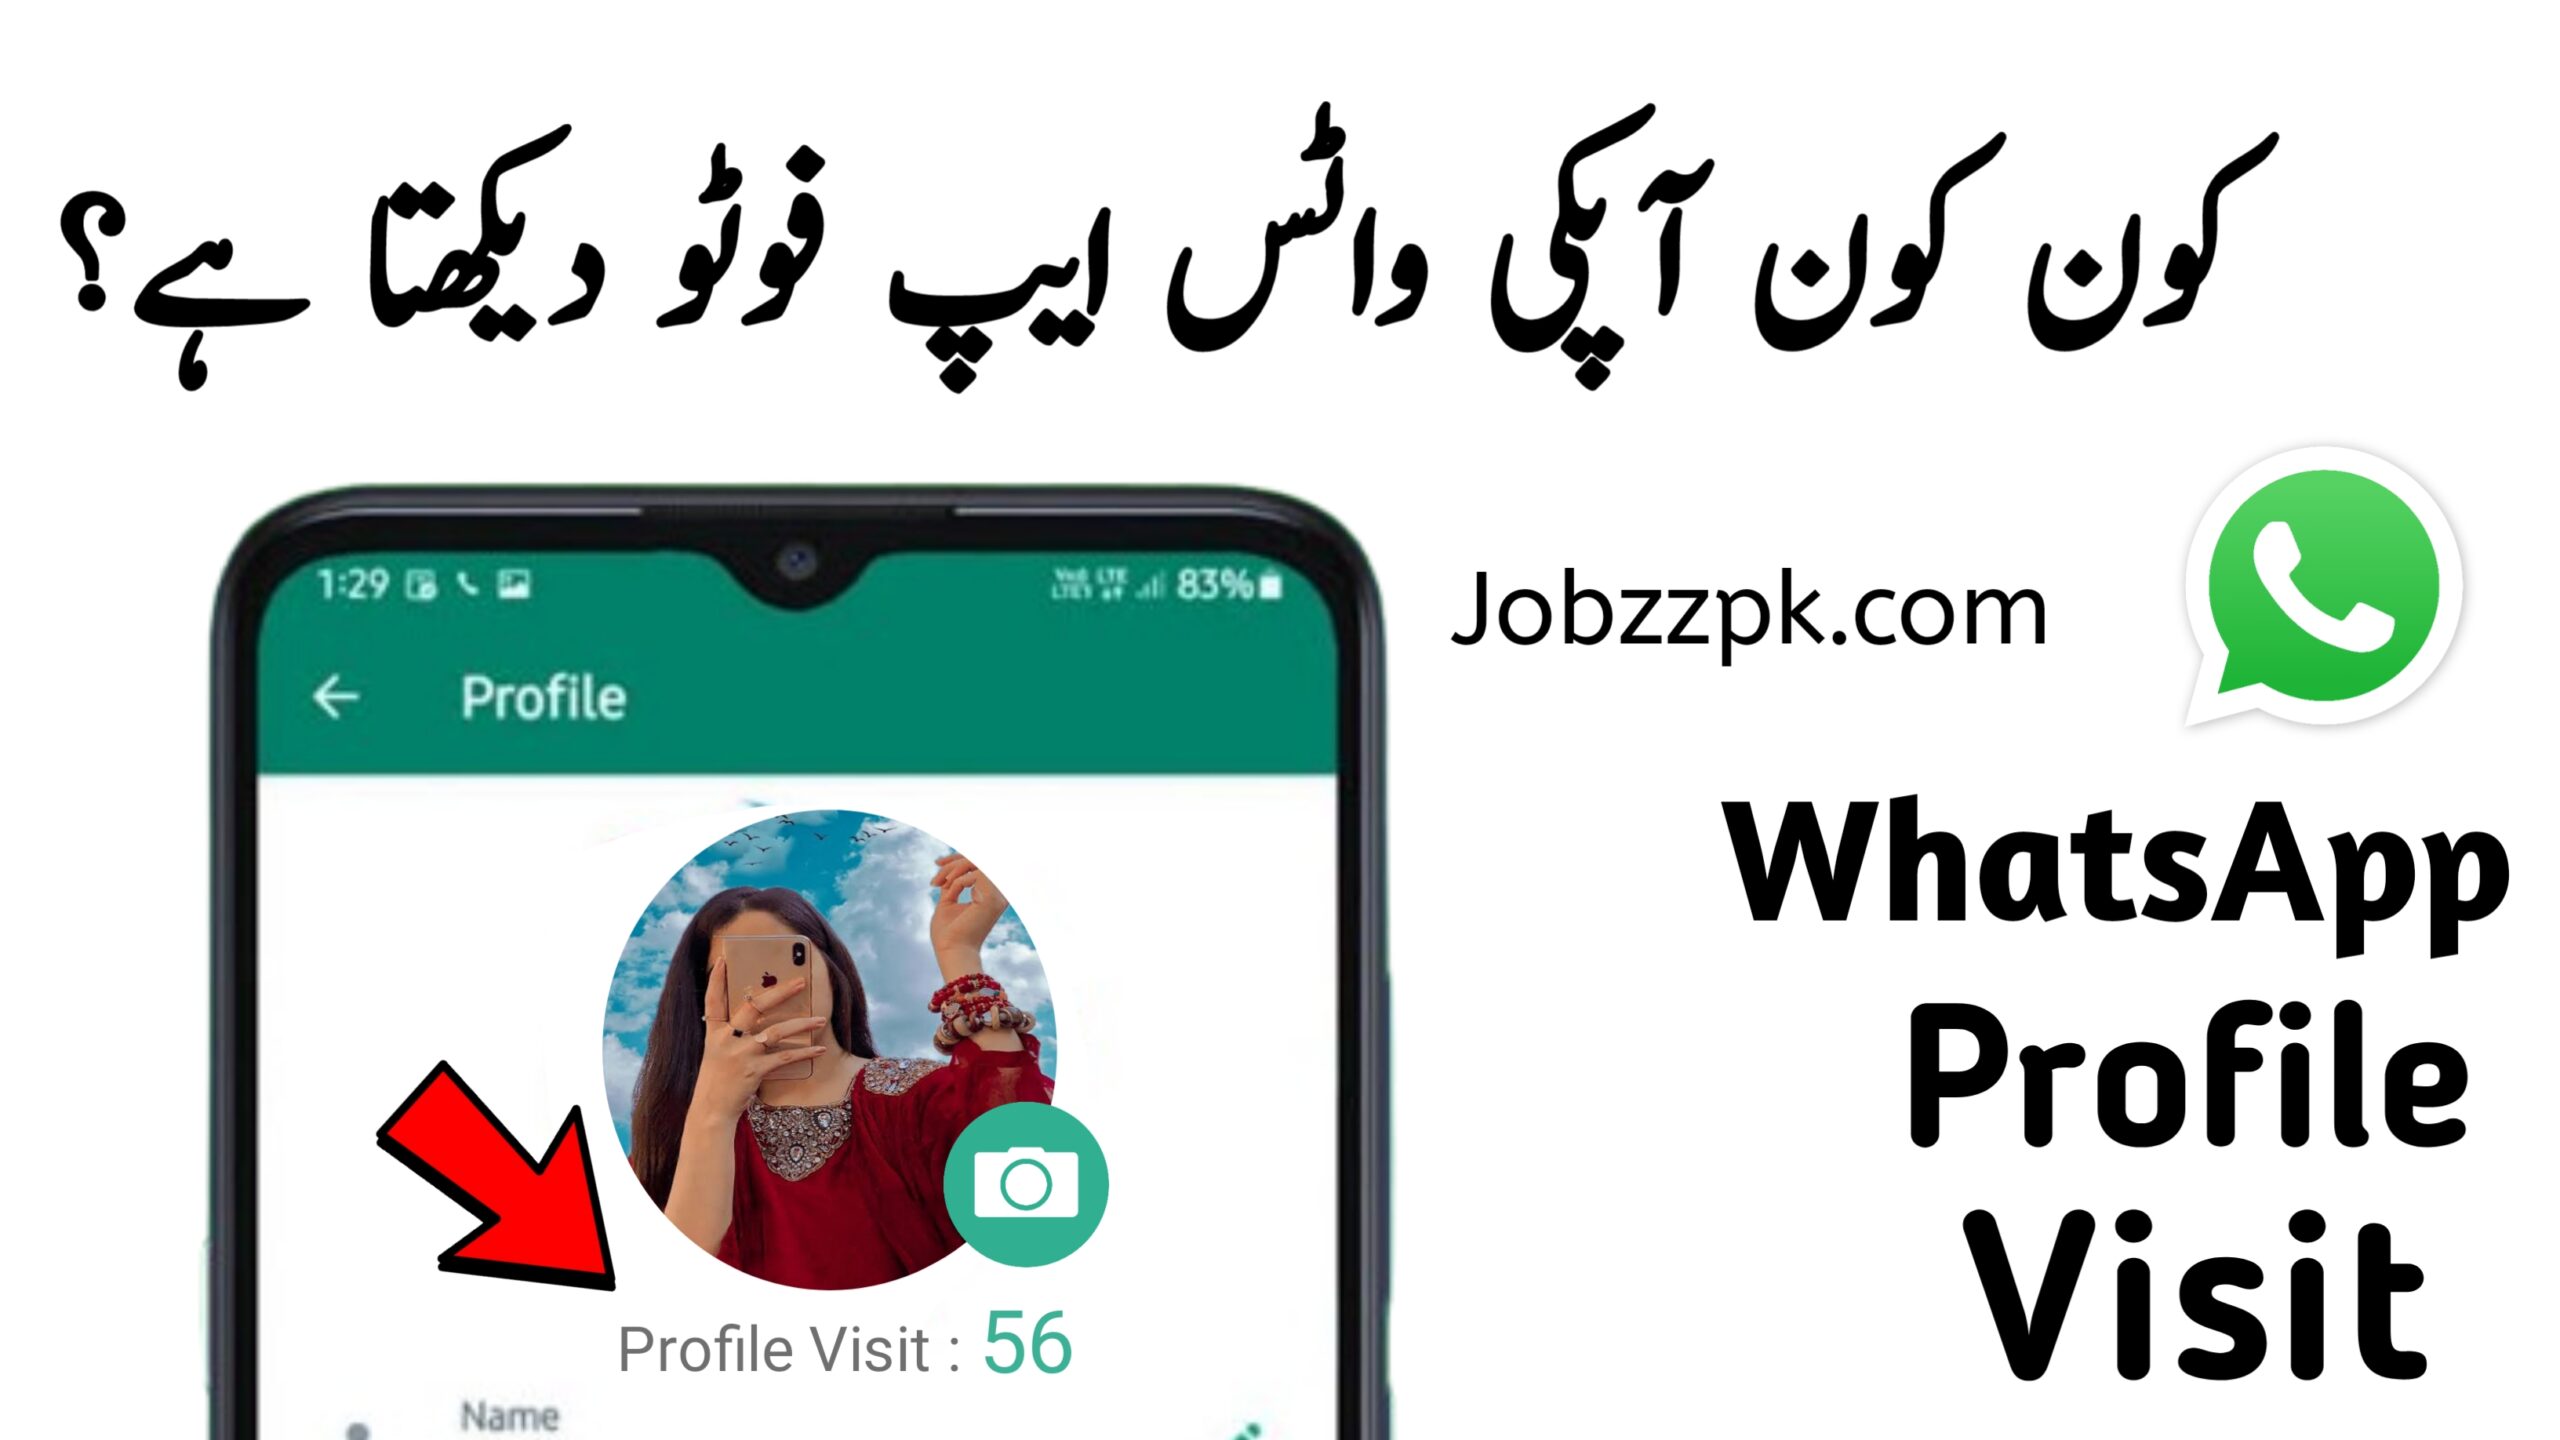 How to Check Easily Who Viewed Your WhatsApp Profile?